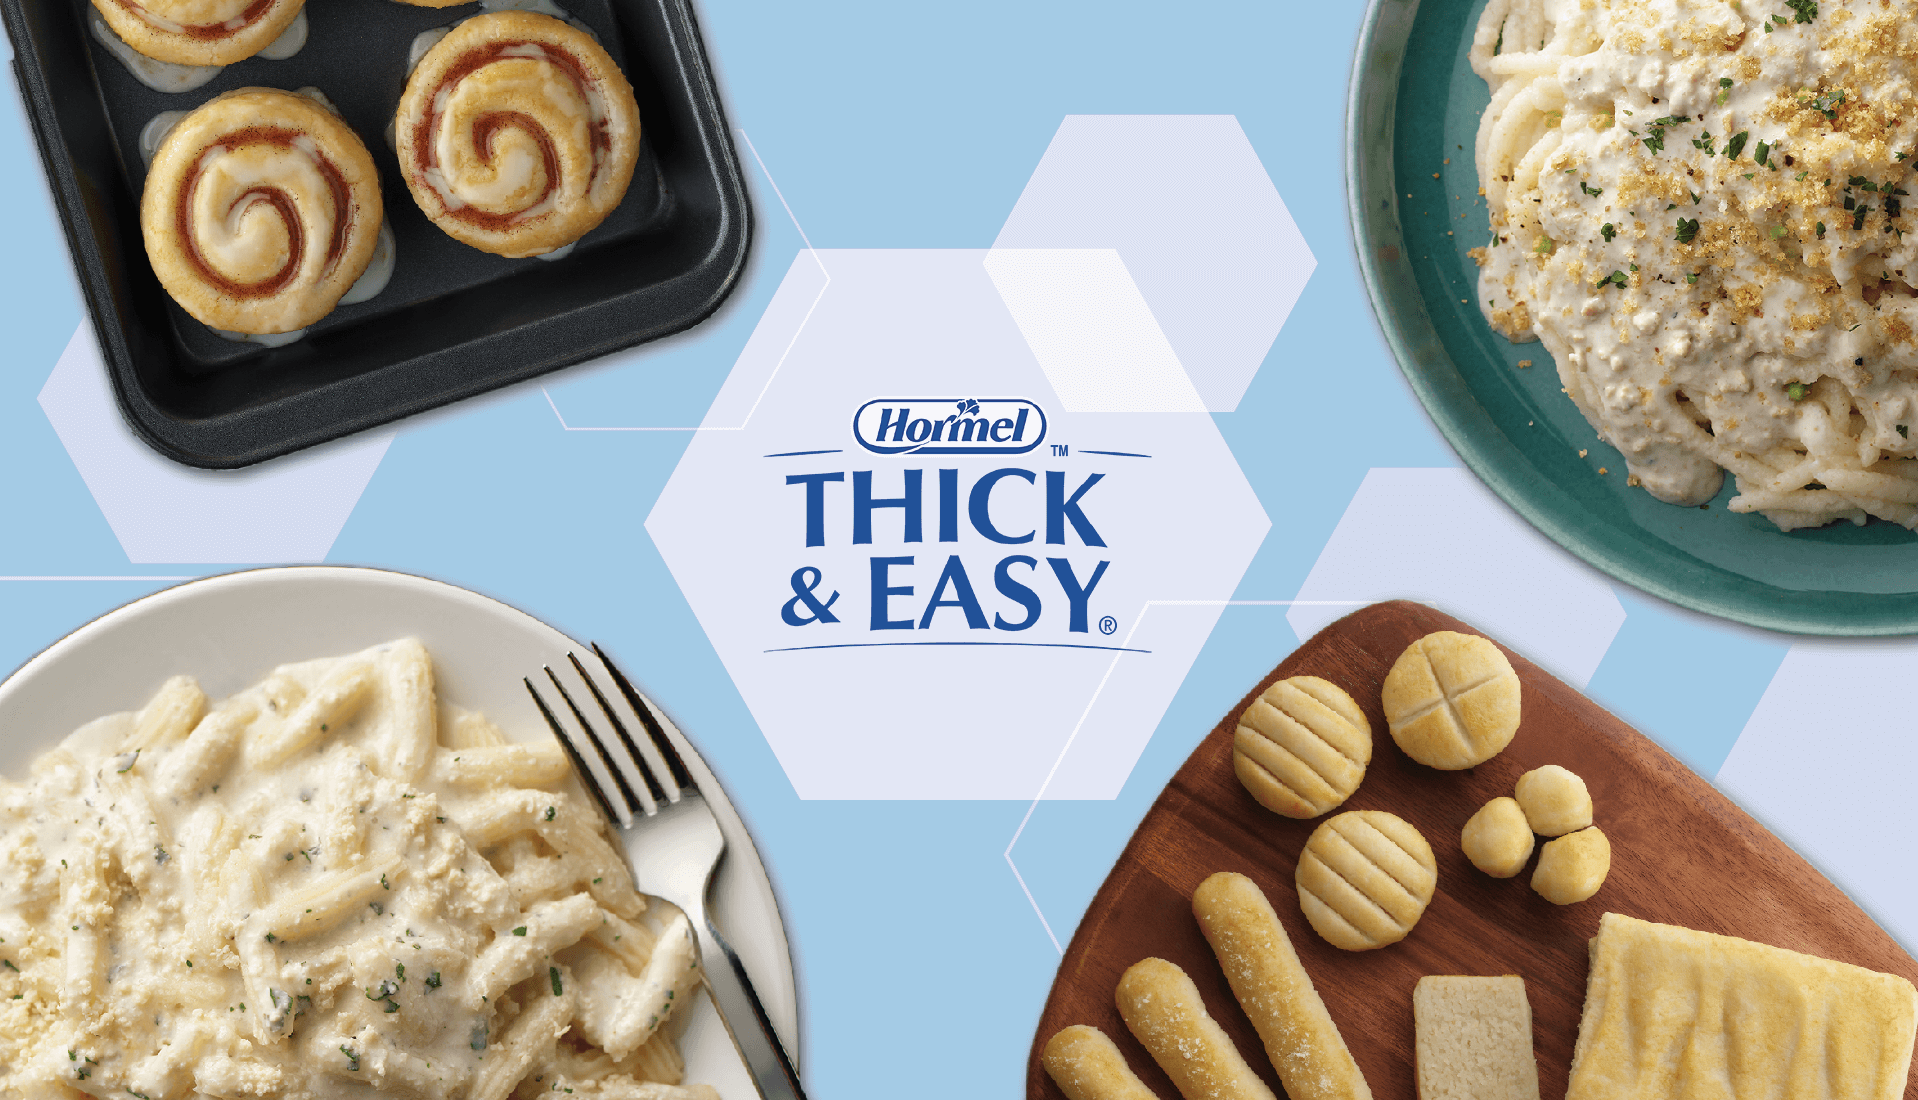 The Thick and Easy logo and 4 recipes made using Hormel Health Lab's labor saving products over a blue background 